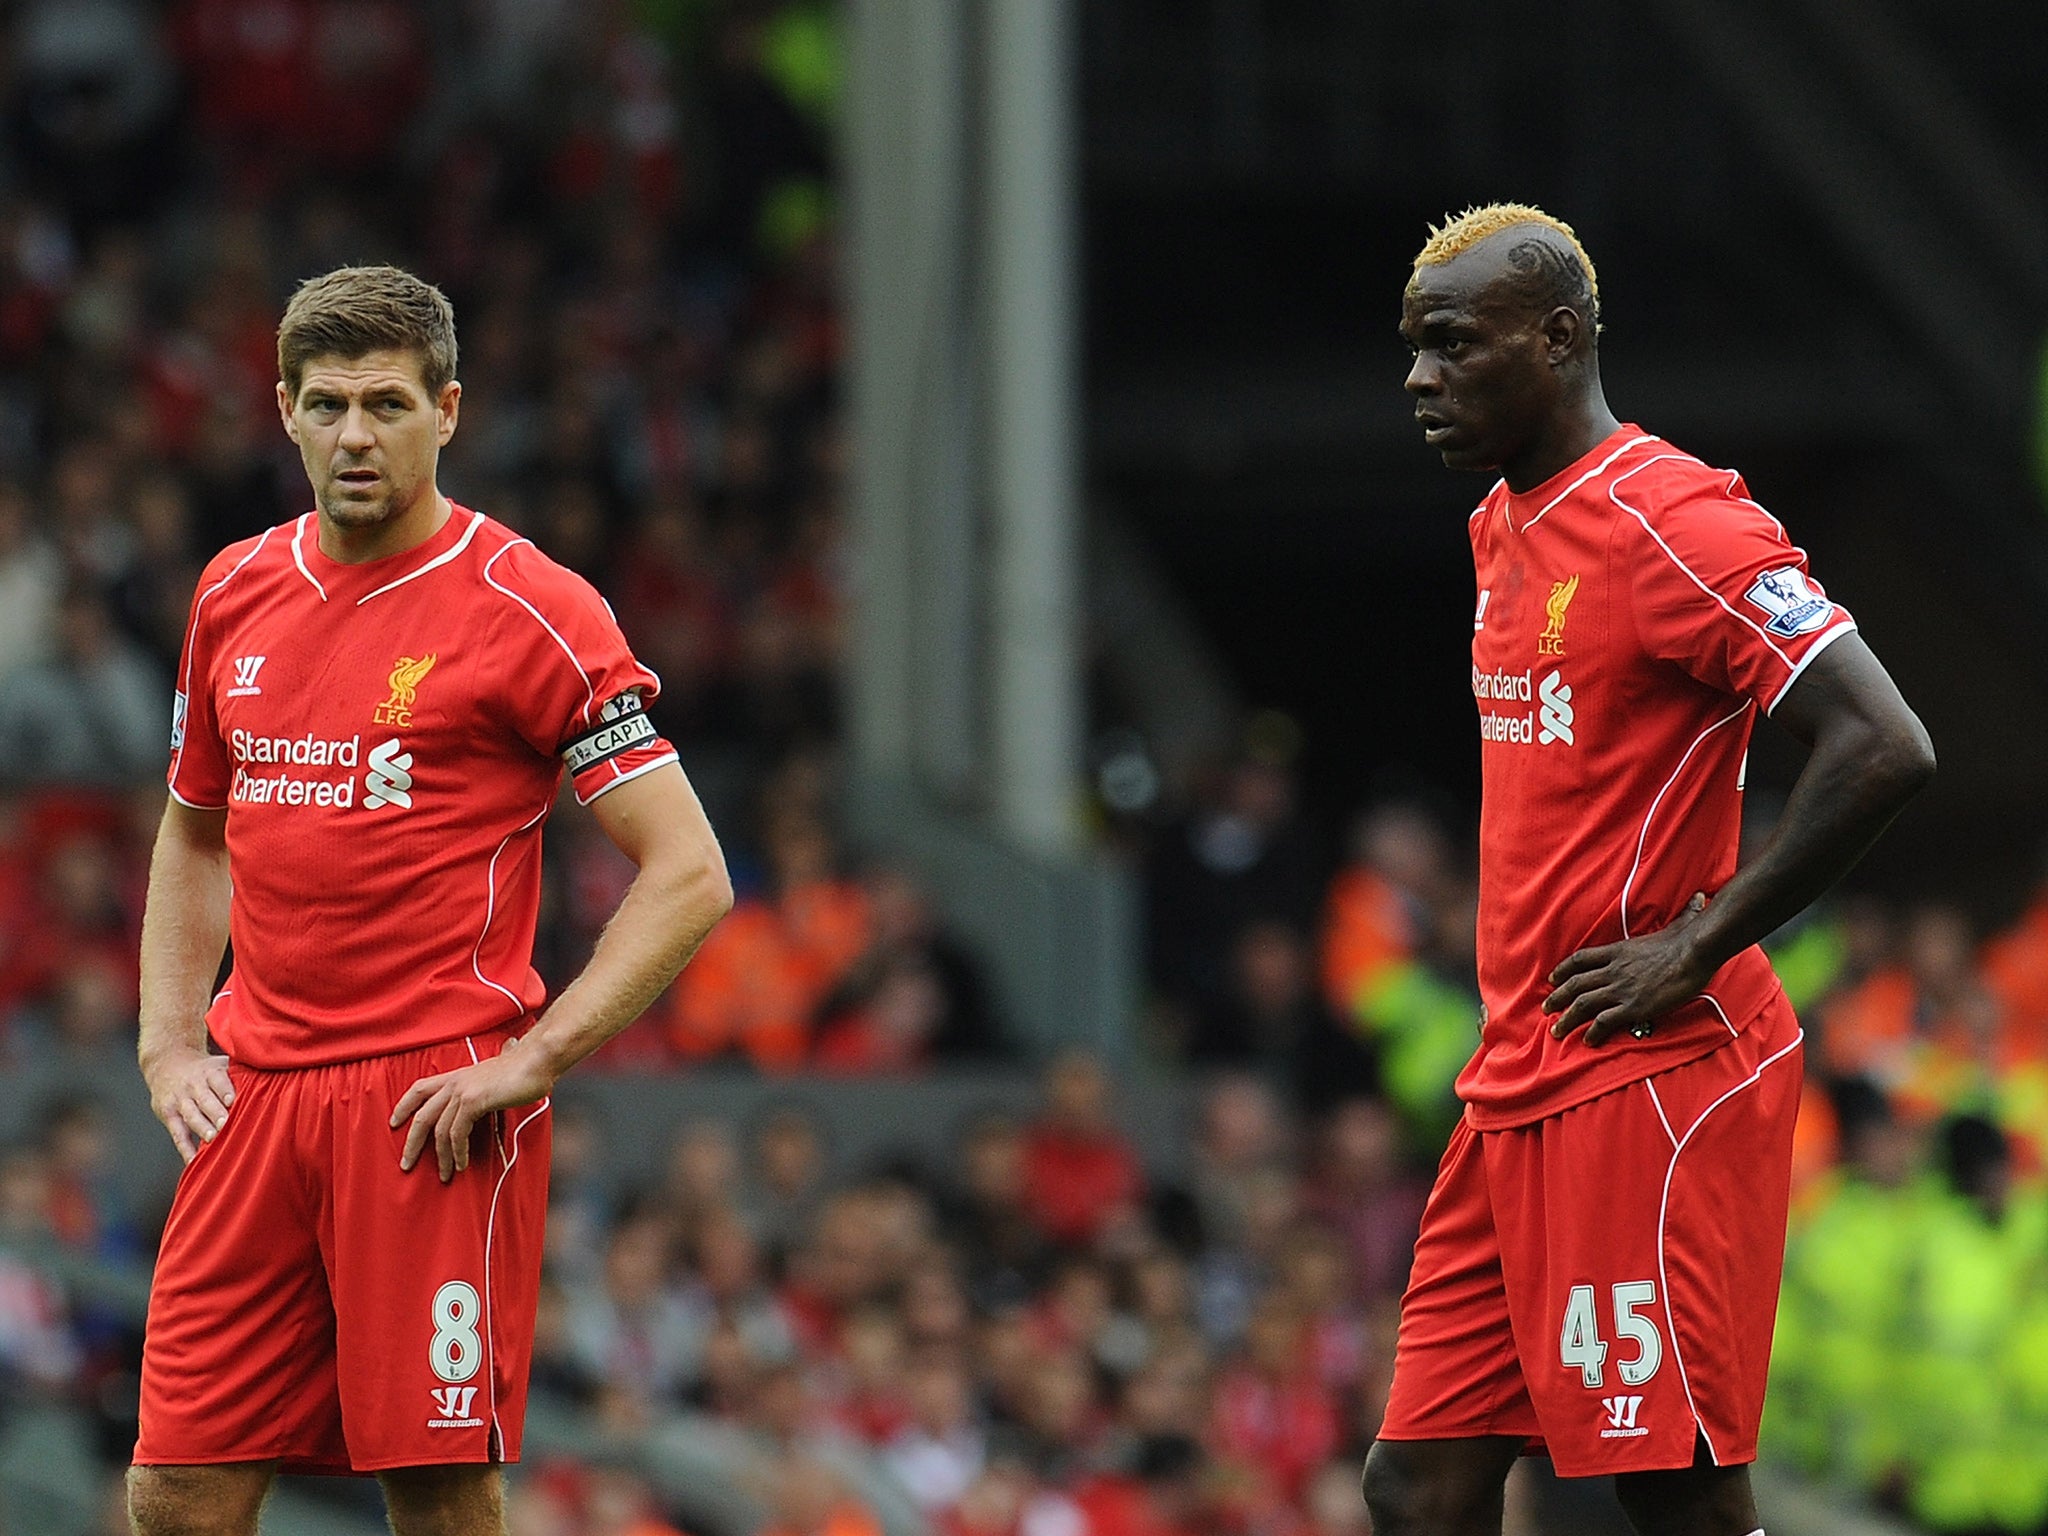 Steven Gerrard and Mario Balotelli pictured at Liverpool